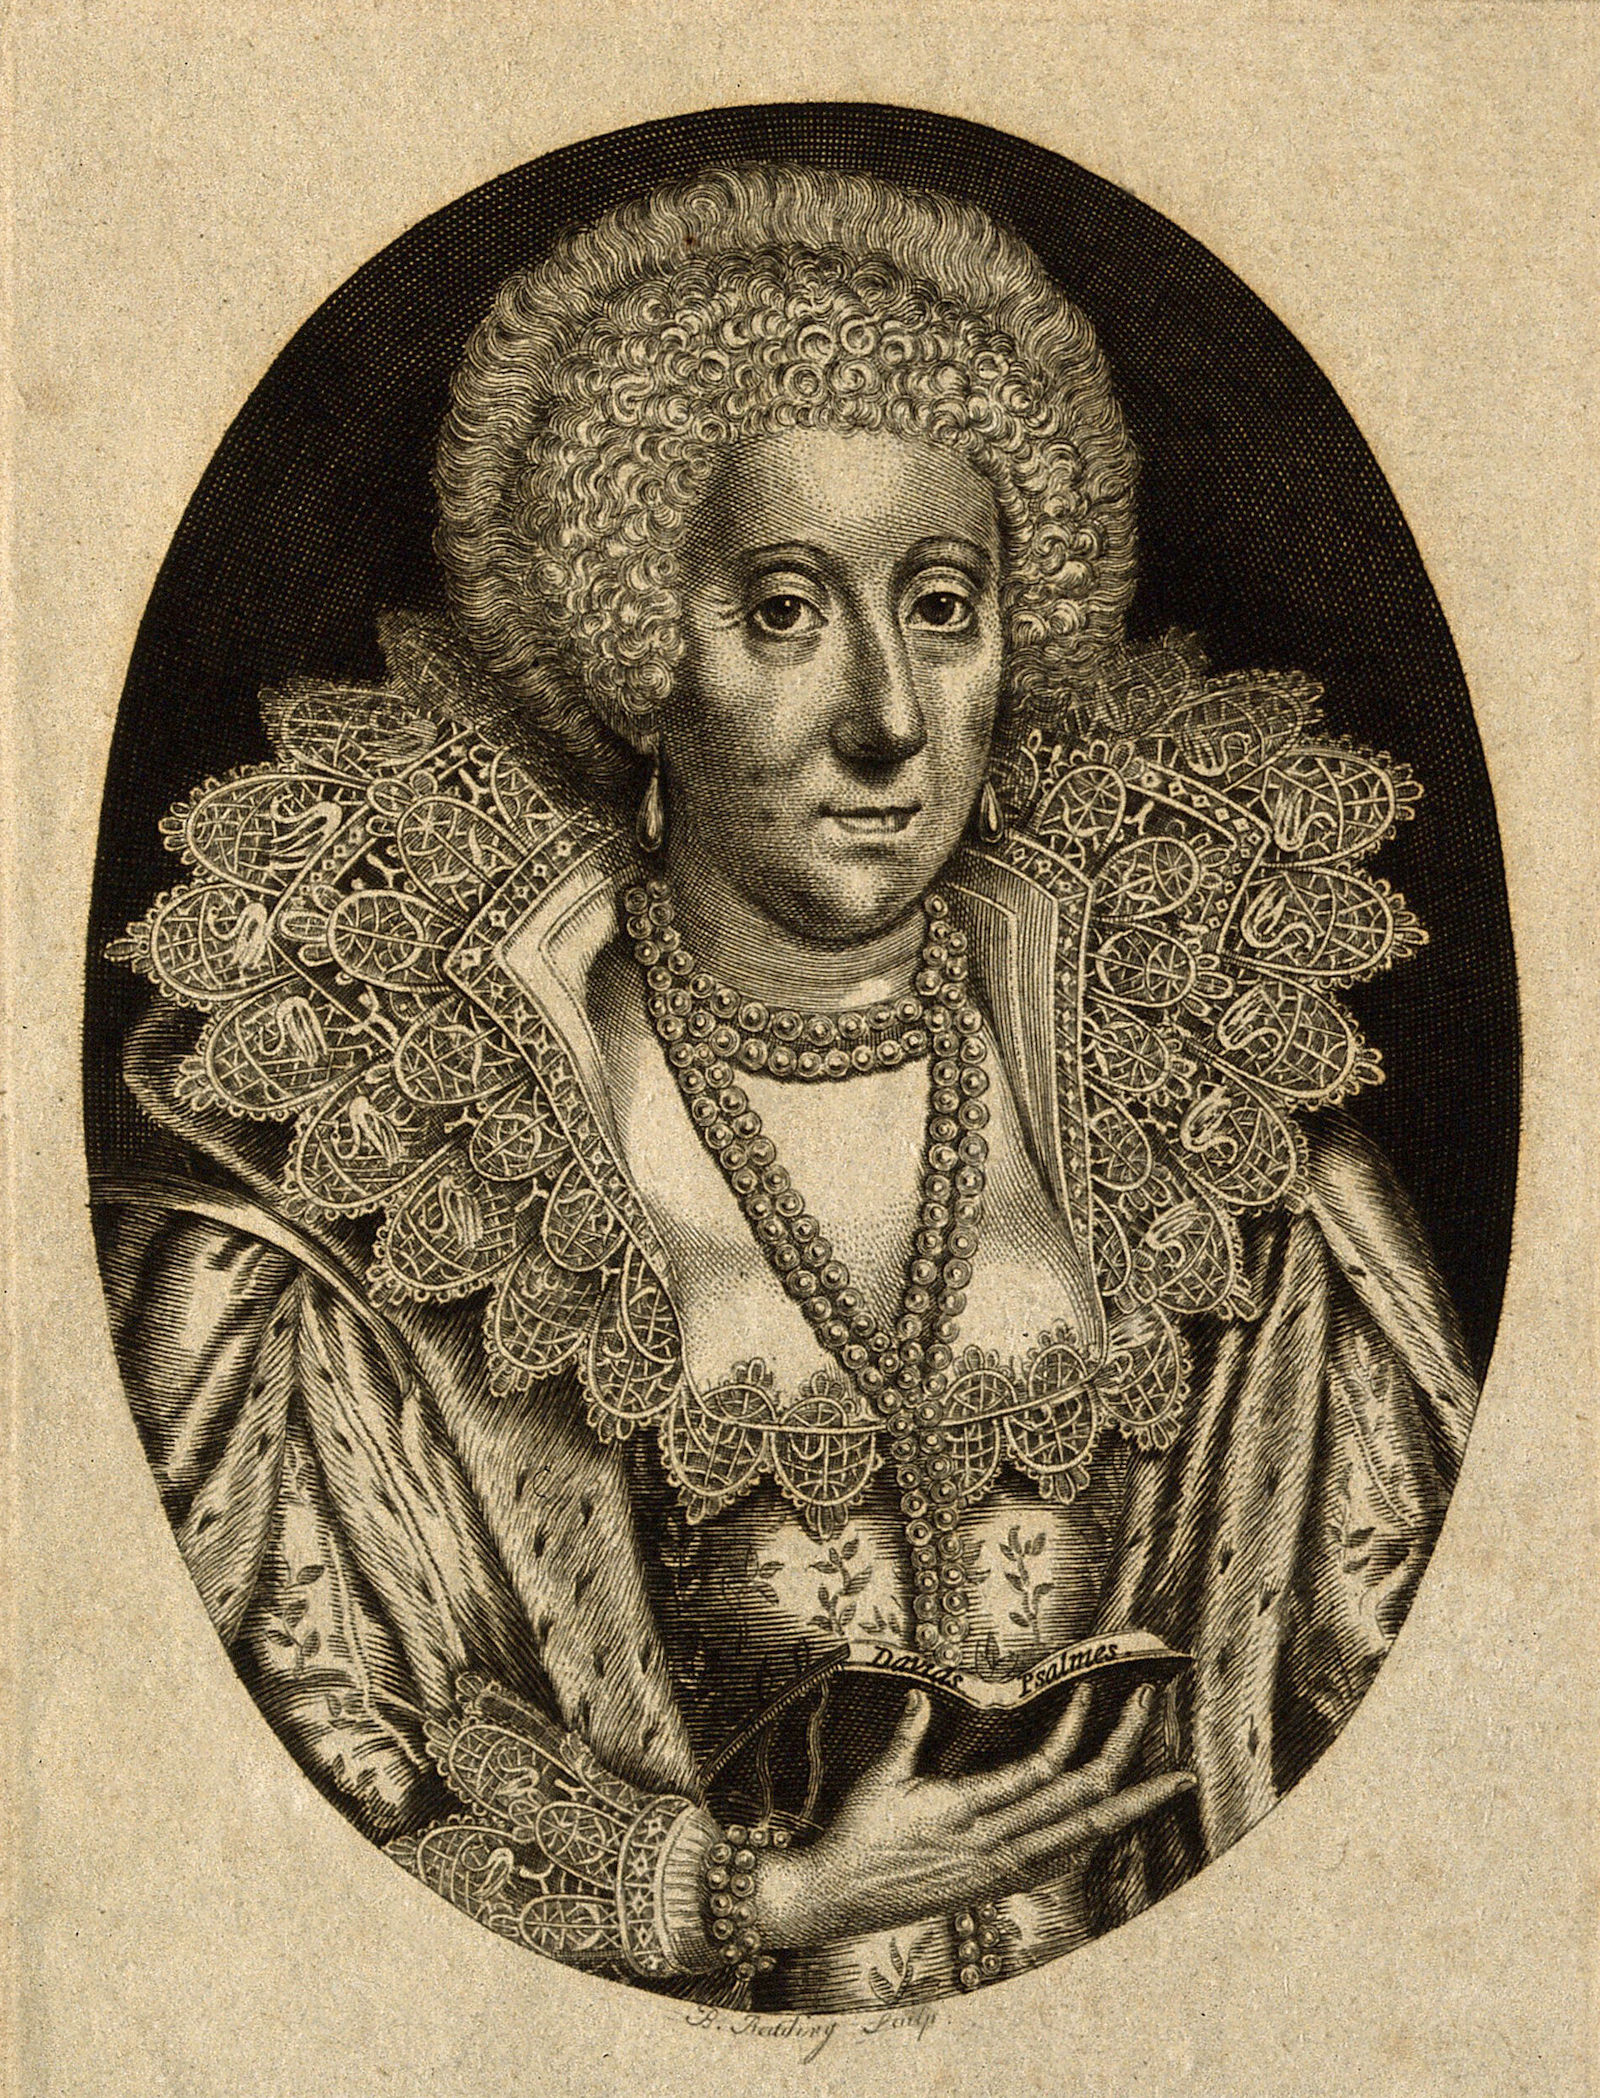 Mary Sidney Herbert, Countess of Pembroke, line engraving by B. Reading after S. van der Passe. Wellcome Collection. Public Domain.